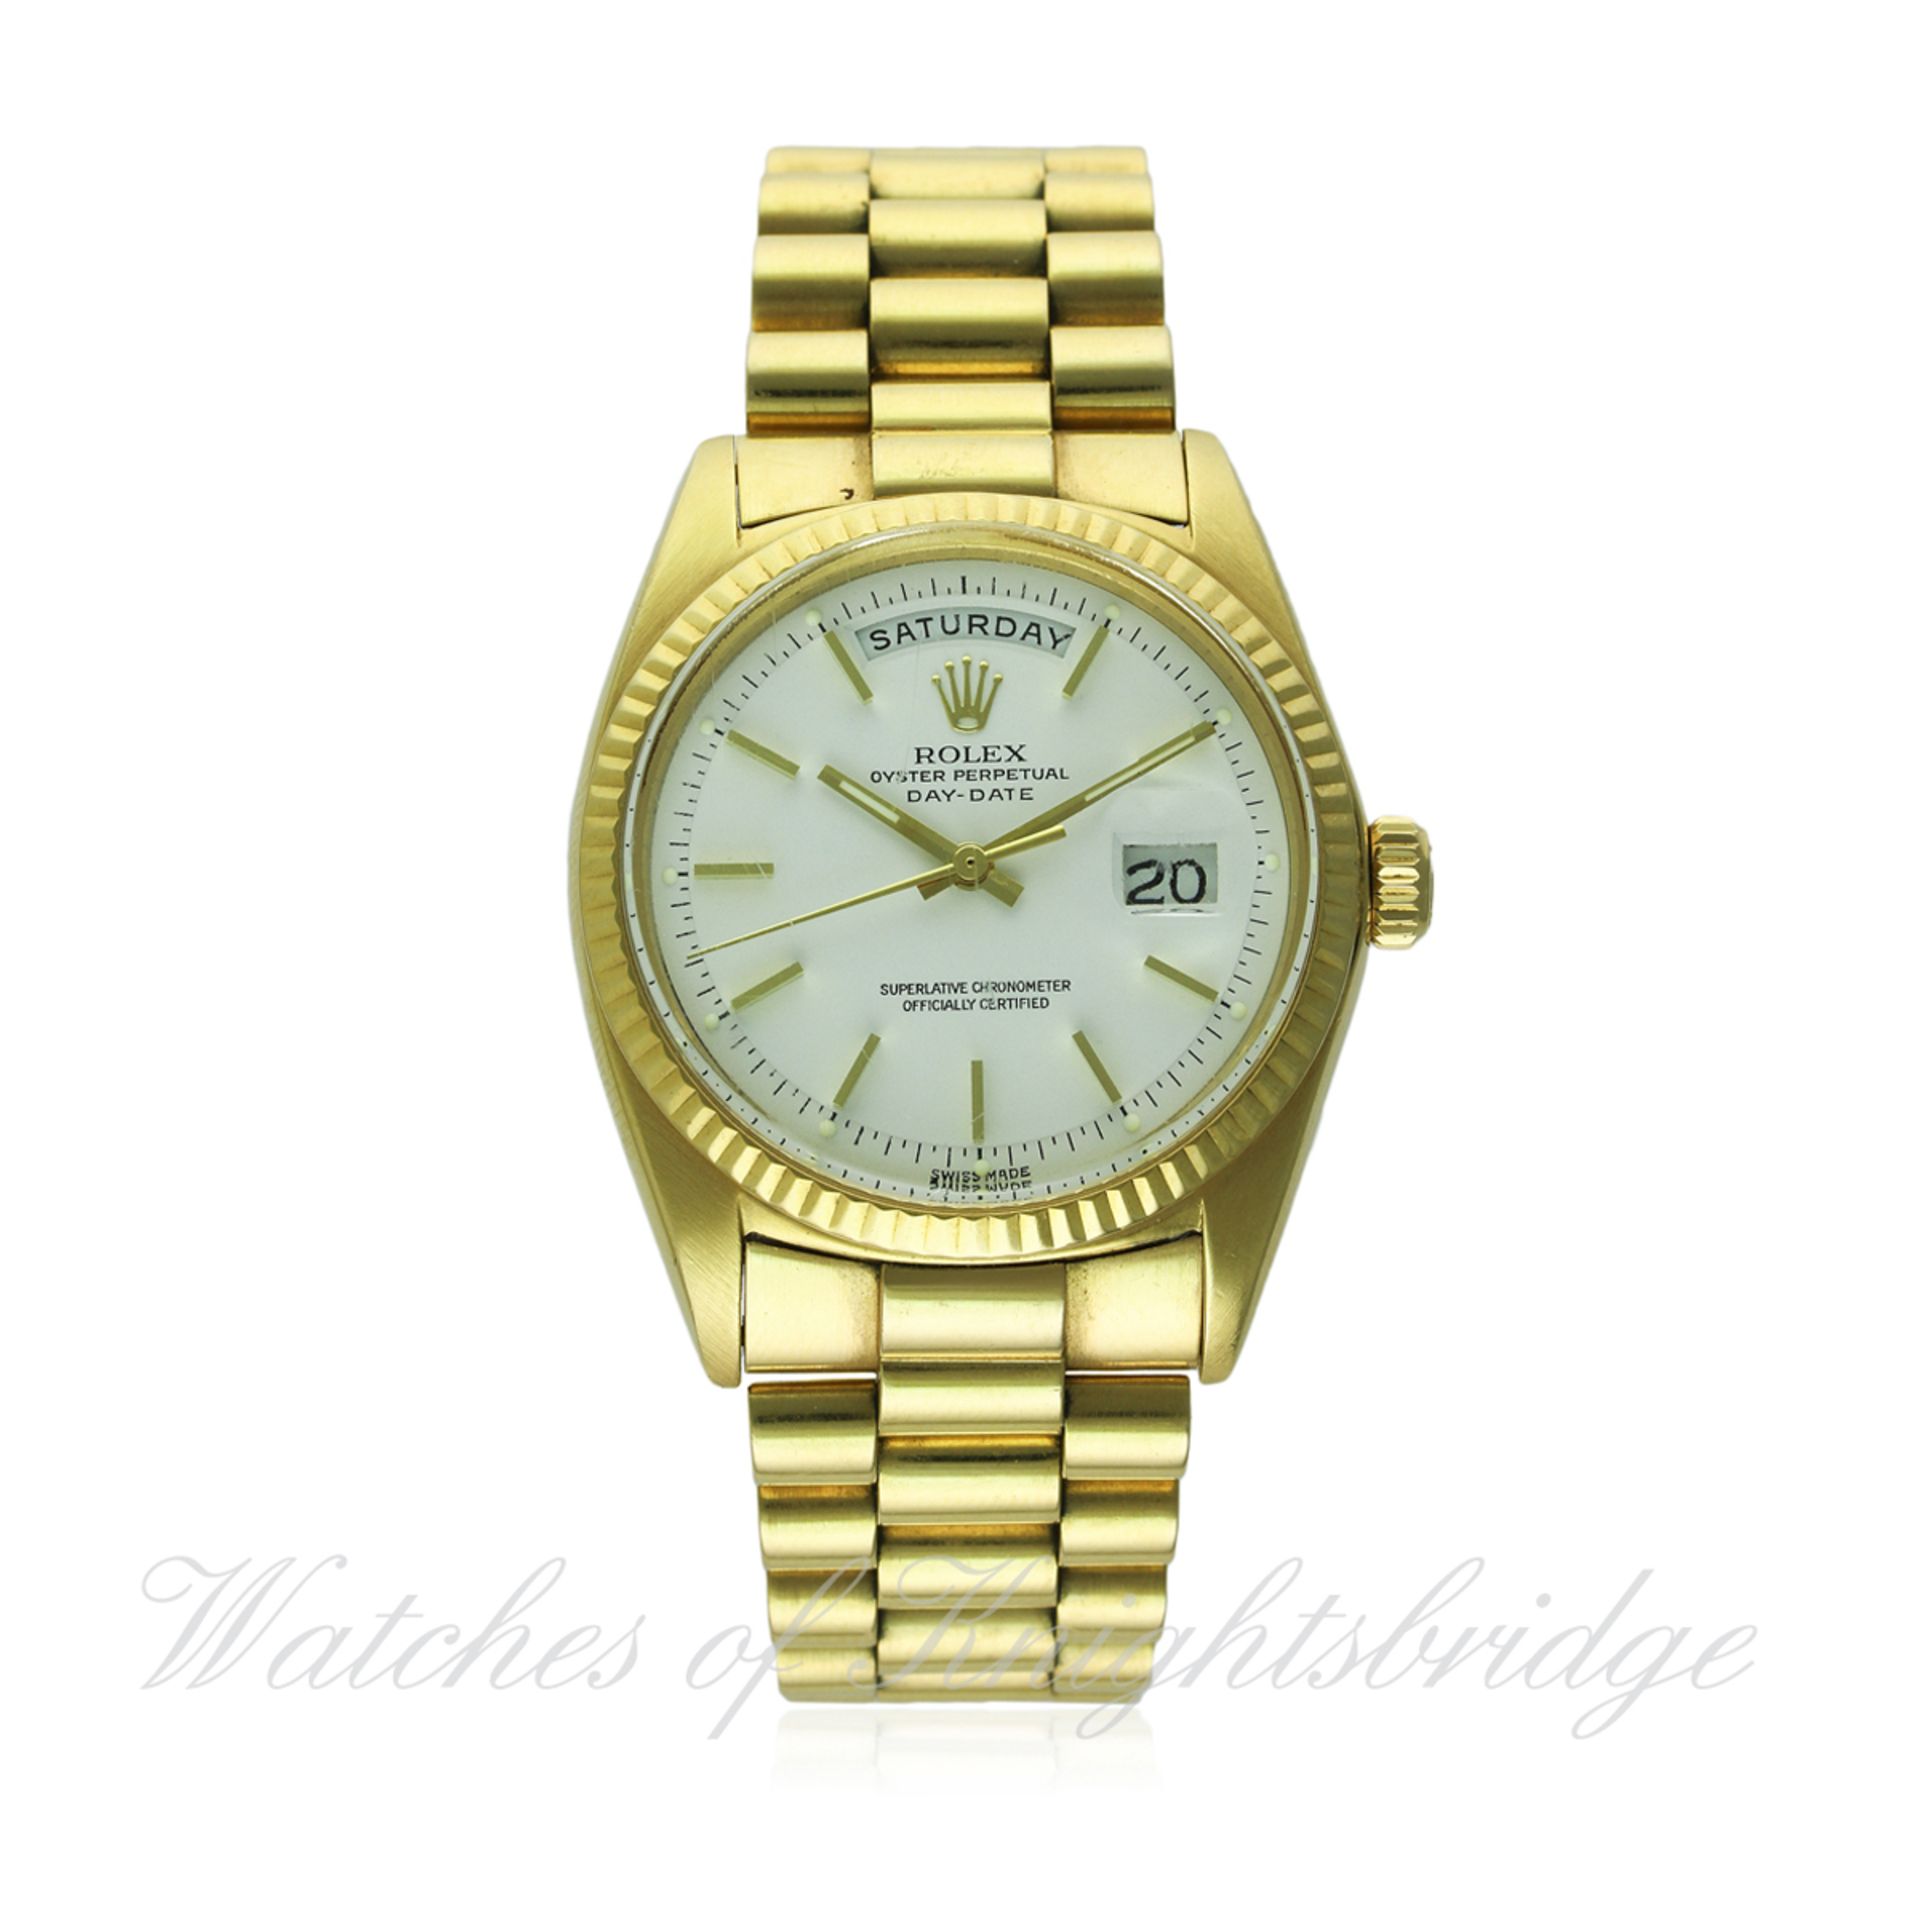 A GENTLEMAN'S 18K SOLID GOLD ROLEX OYSTER PERPETUAL DAY DATE BRACELET WATCH CIRCA 1969, REF. 1803
D: